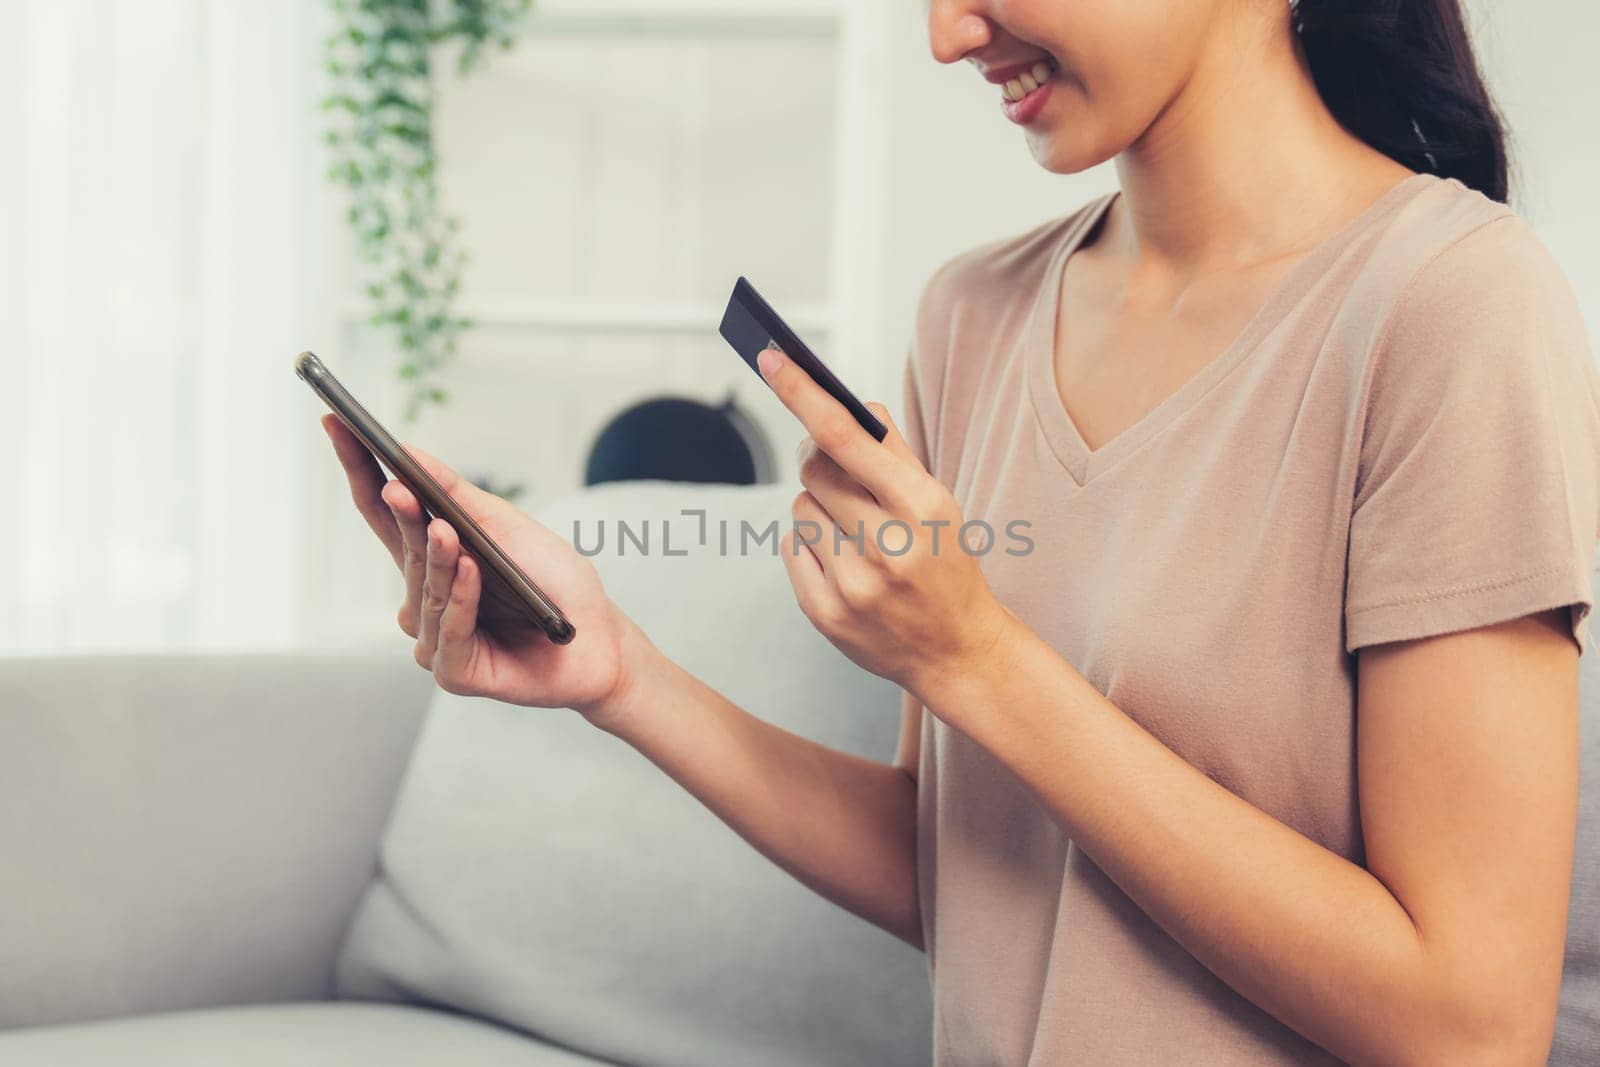 Contented young woman eagerly makes an online purchase using her smartphone. by biancoblue